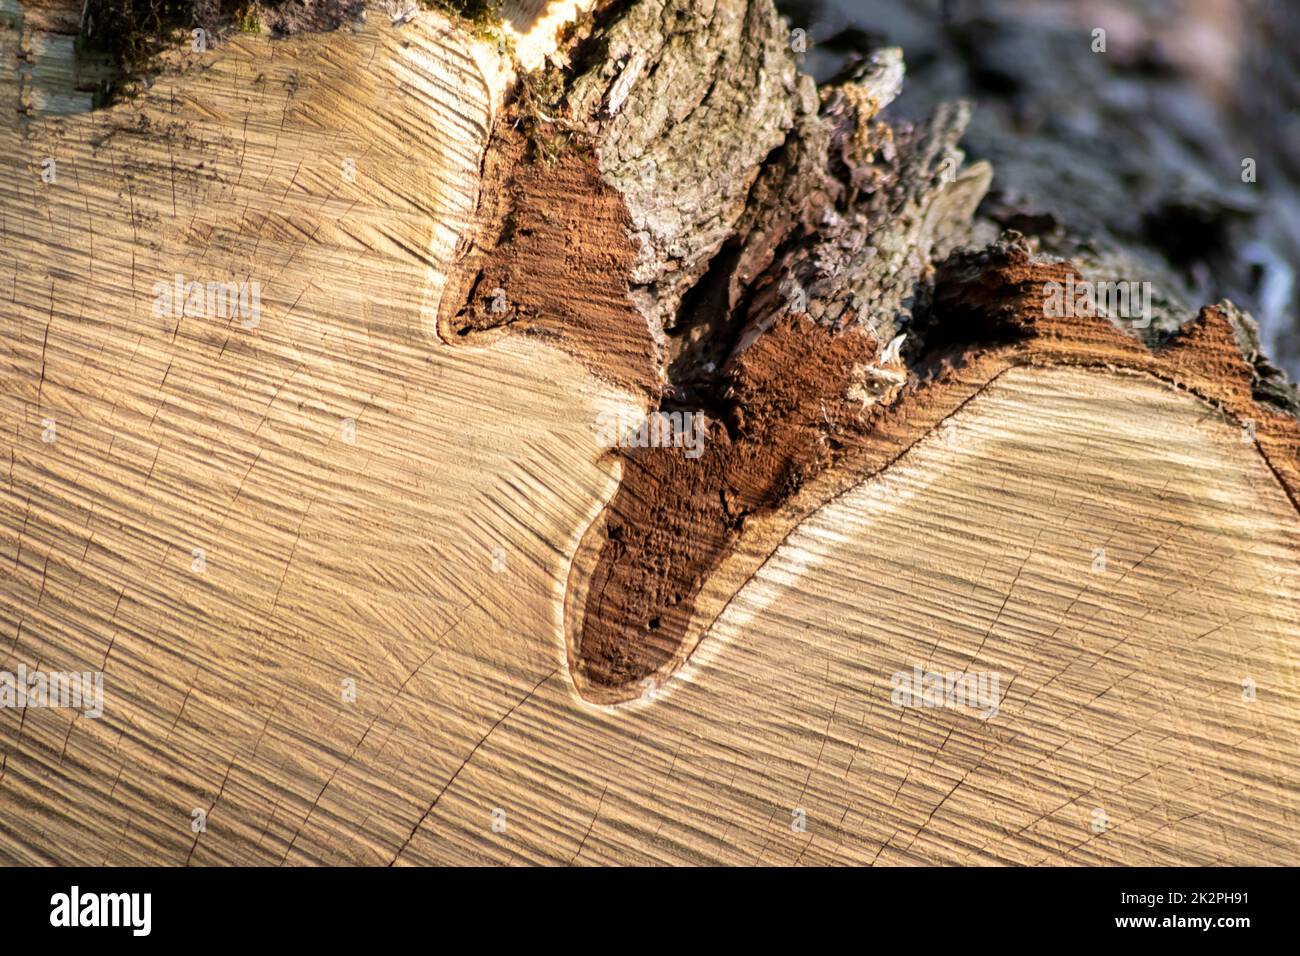 Cut trees of construction wood after deforestation stacked as woodpile show annual rings the age of trees for lumber timber industry as sustainable resources wood log tree carcass Stock Photo